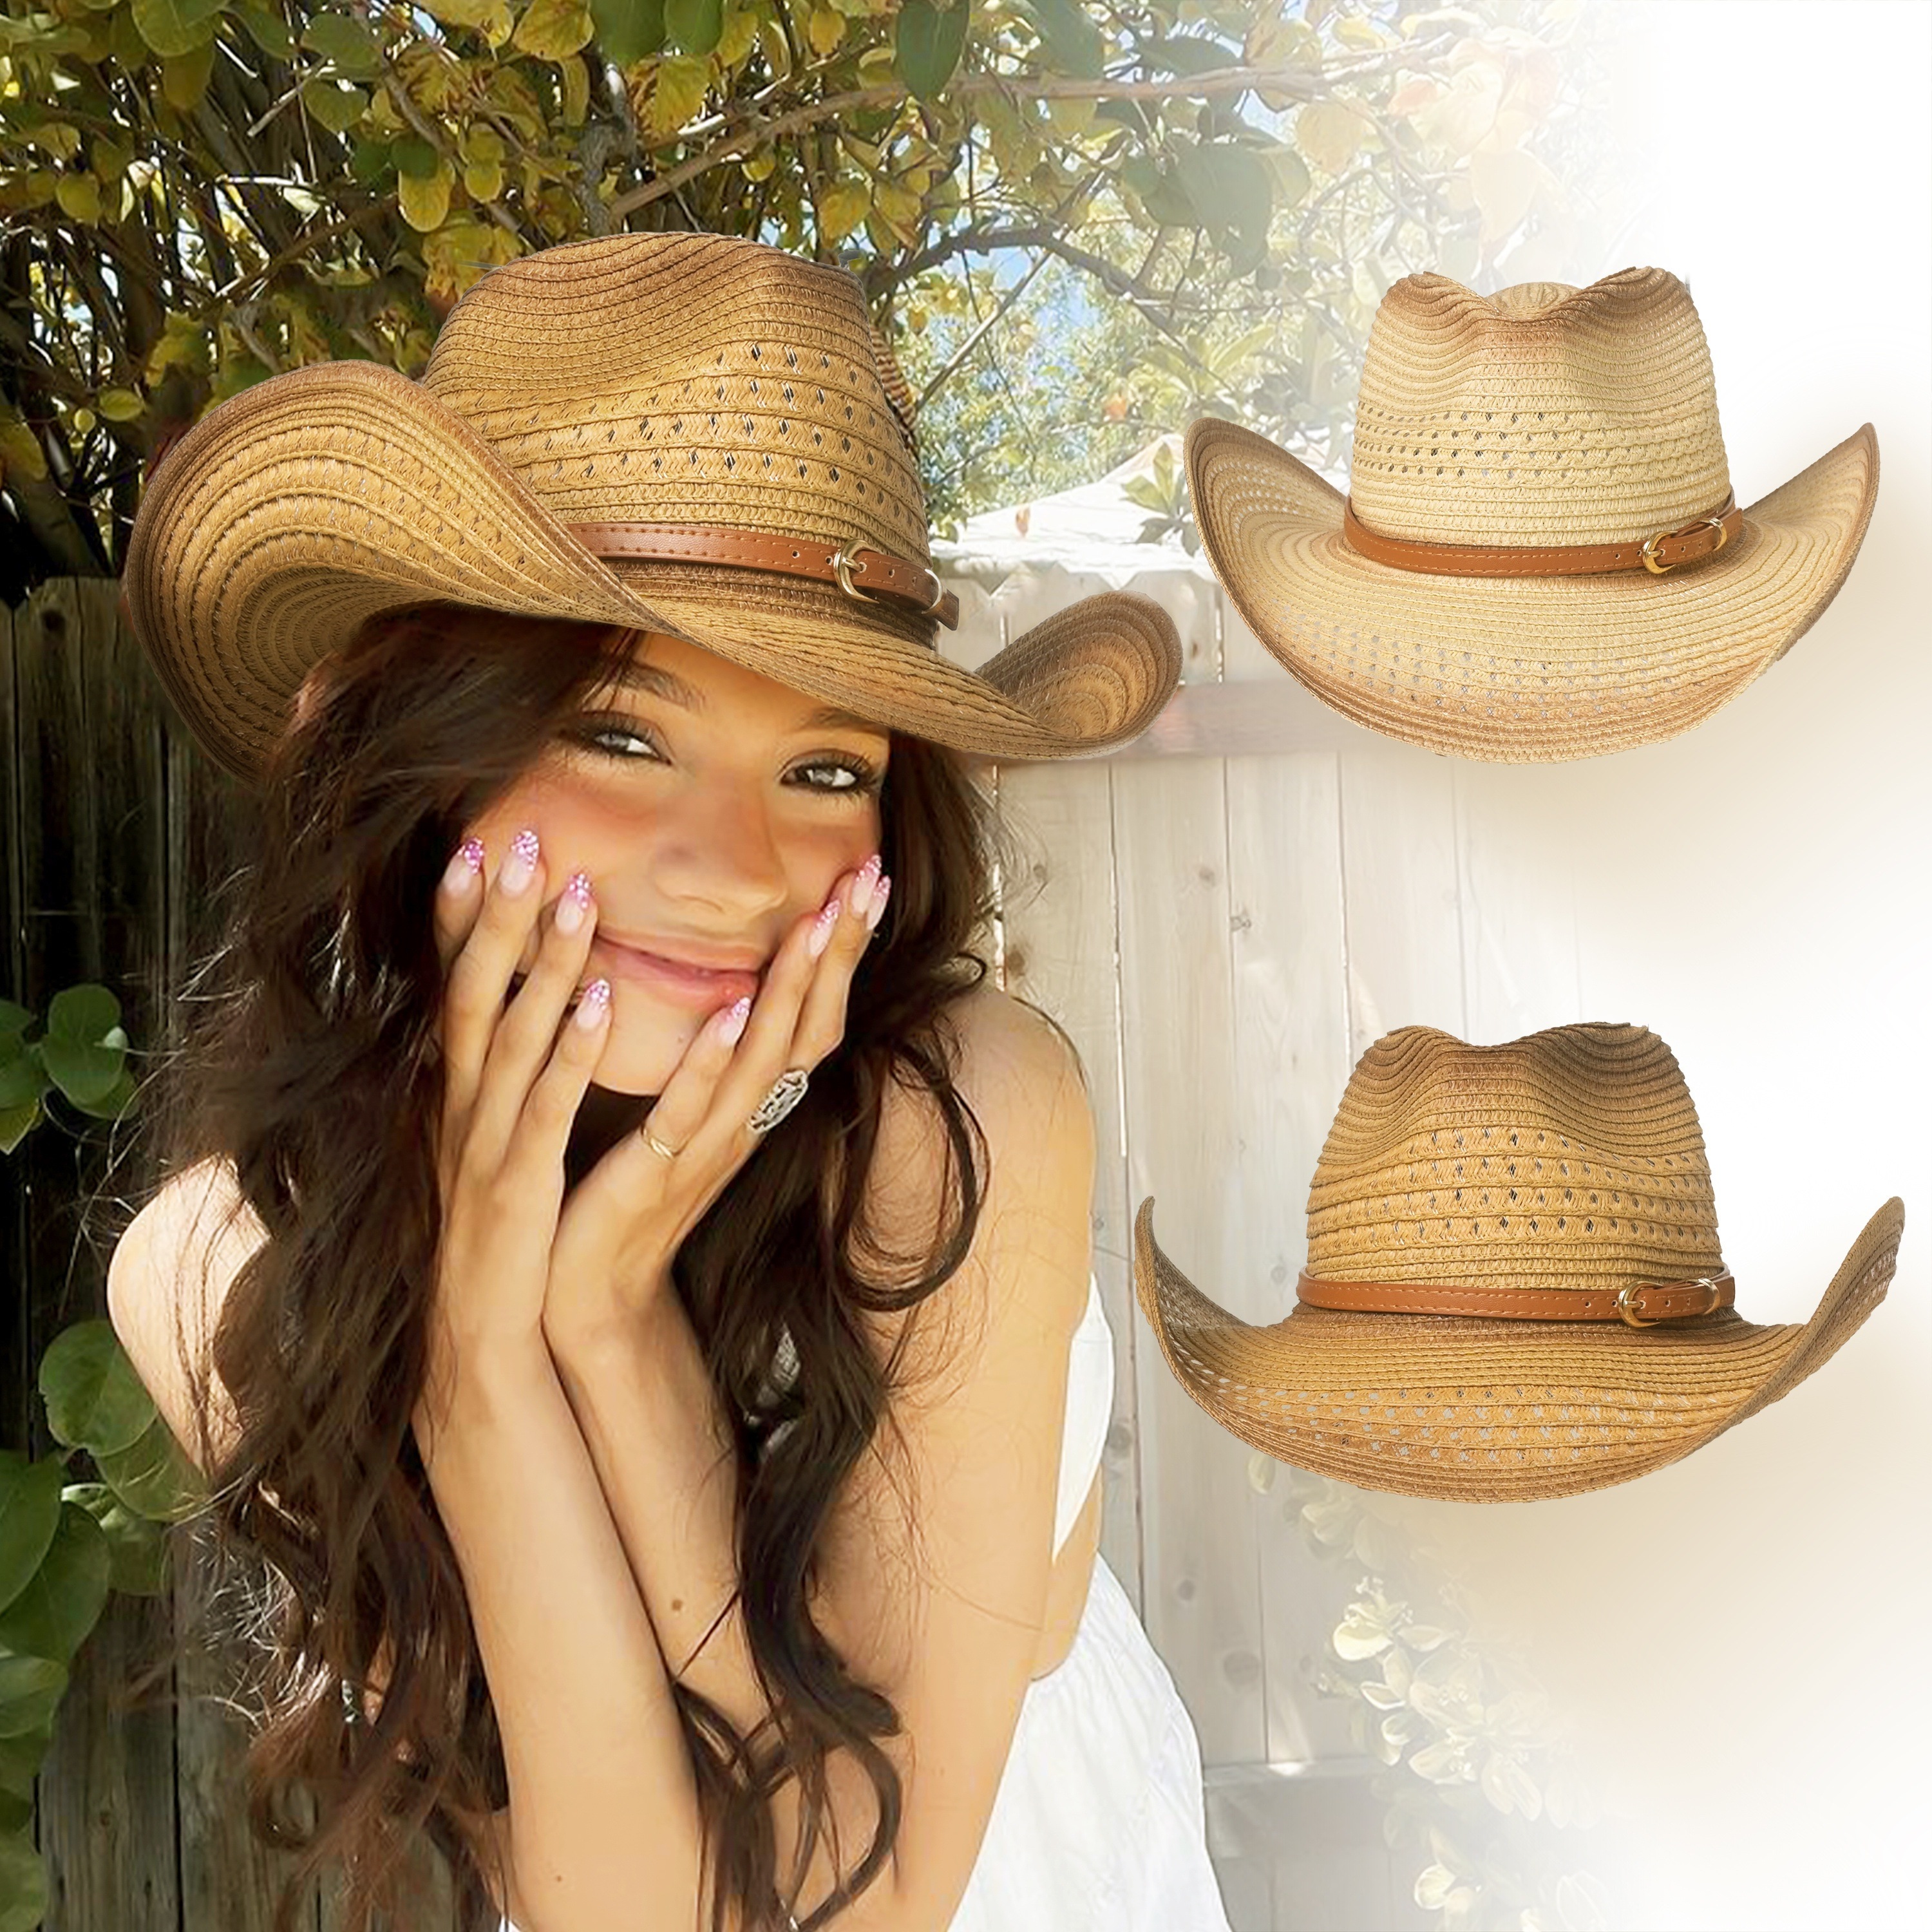 

Western Style Straw Cowboy Hat, Breathable Hollow-out Design, Adjustable Chin Strap, Sun Hat For Outdoor, Beach & Travel - Unisex Summer Hat